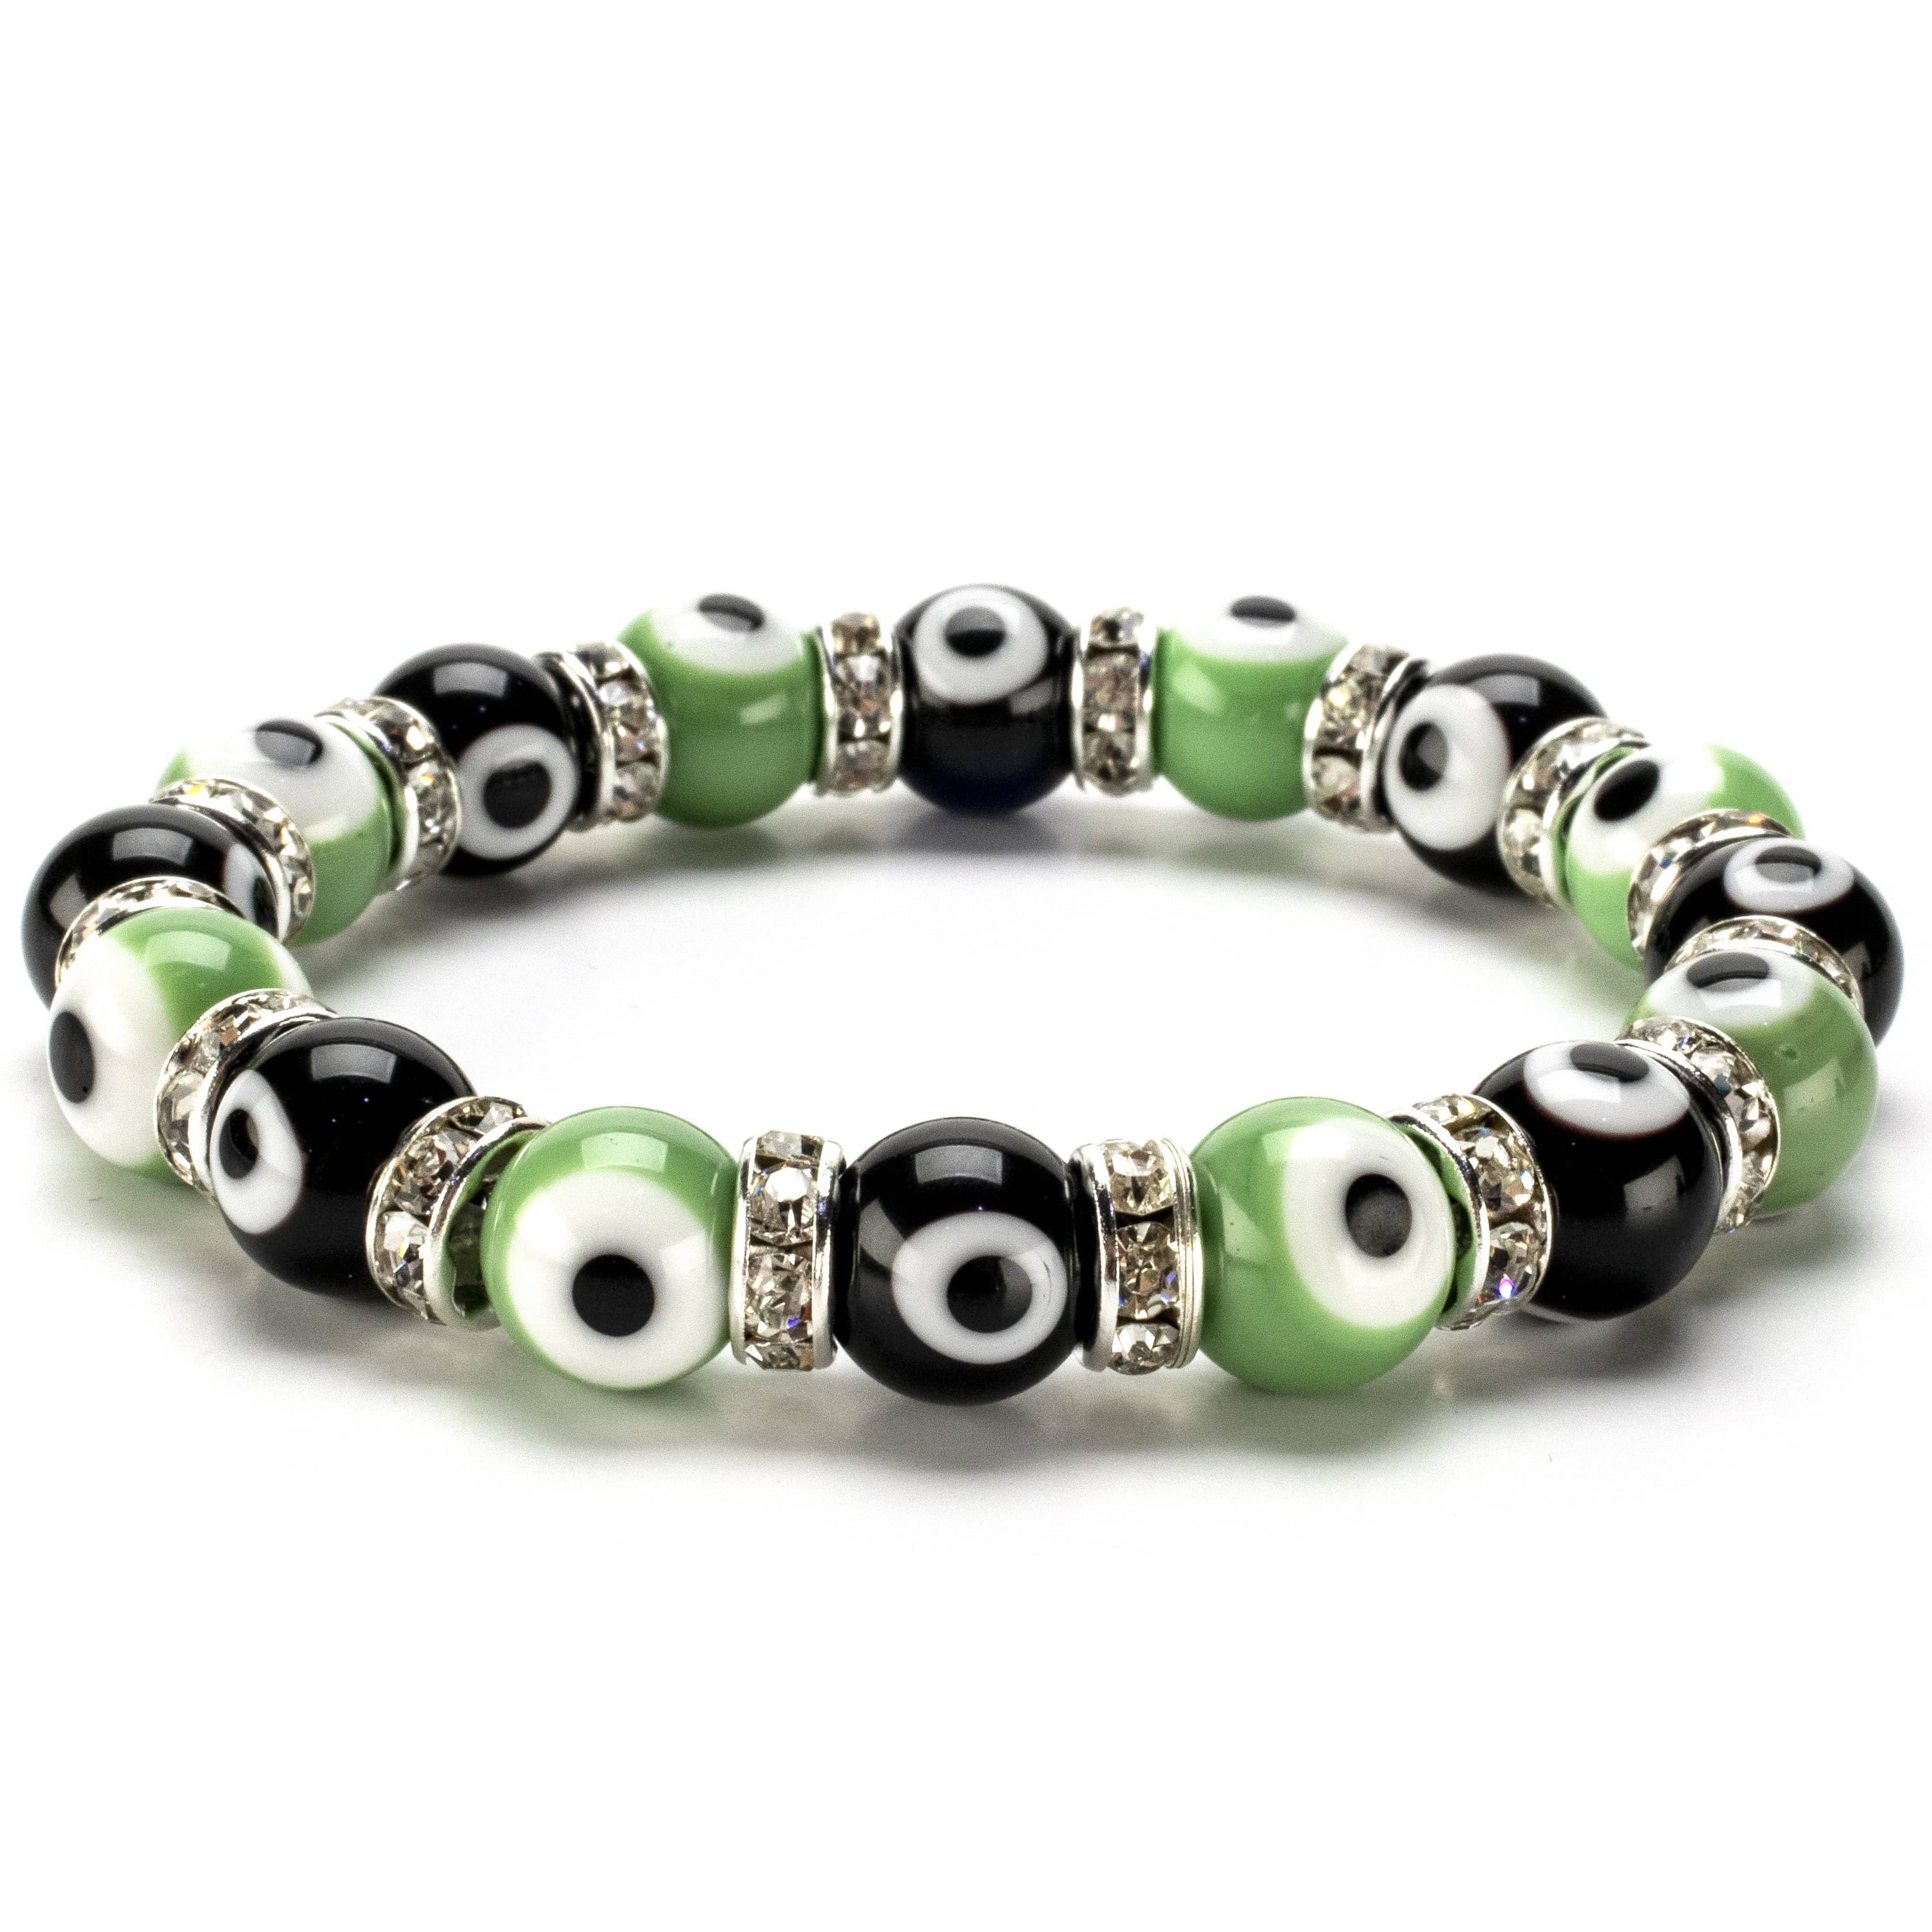 Kalifano Evil Eye Jewelry Black and Green Evil Eye Glass Bracelet with Cubic Zirconia Crystals BLUE-BEE-28